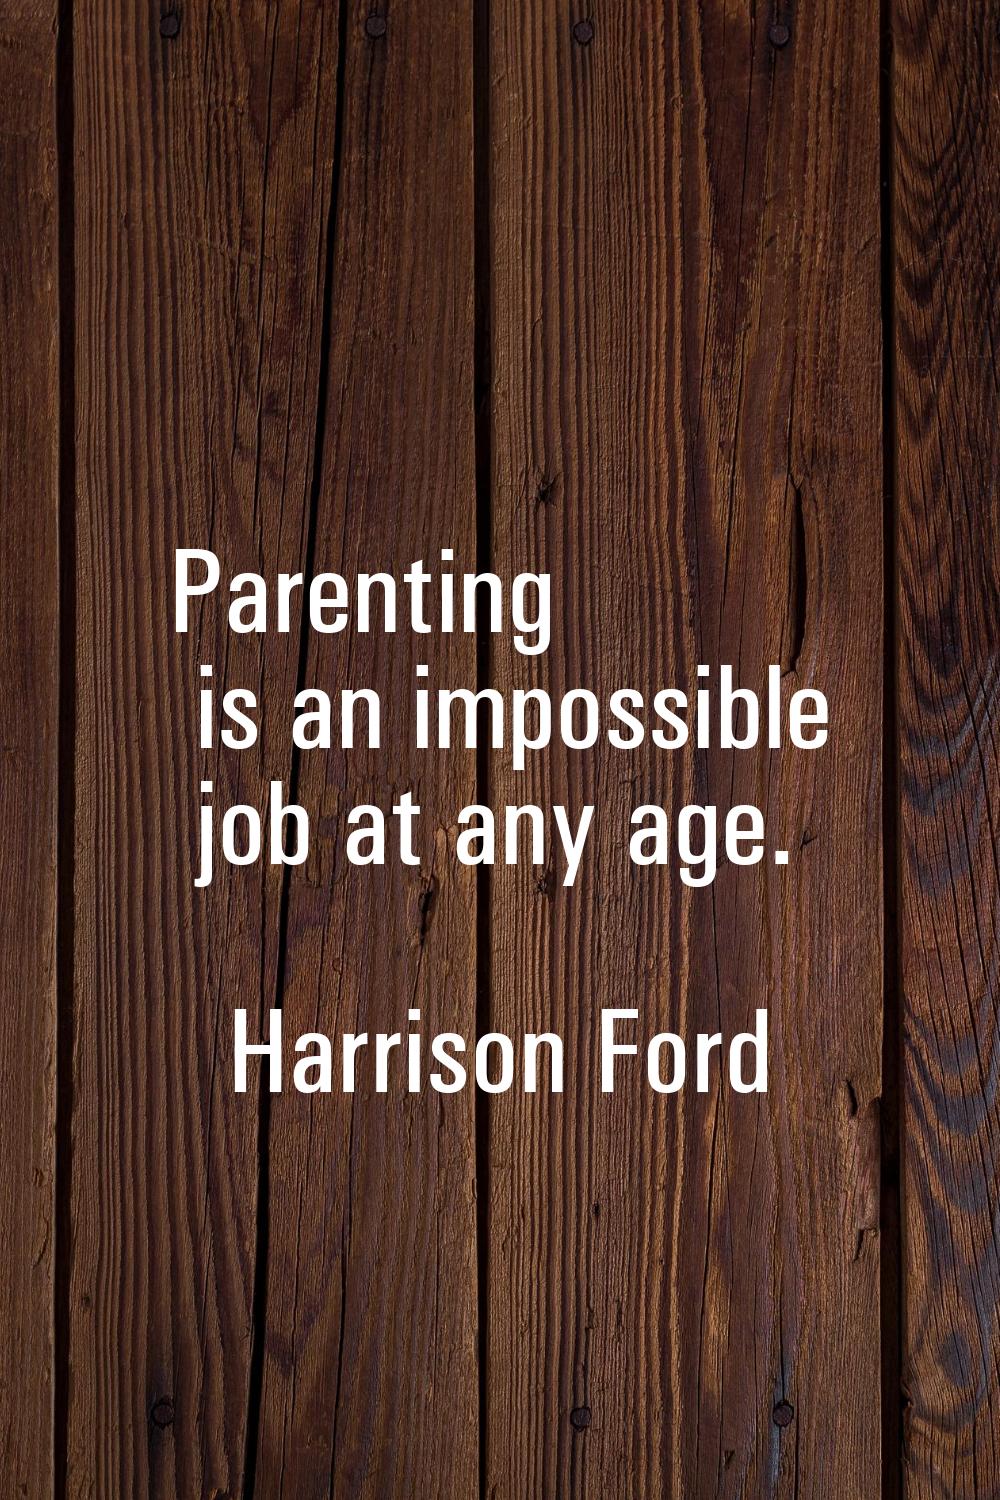 Parenting is an impossible job at any age.